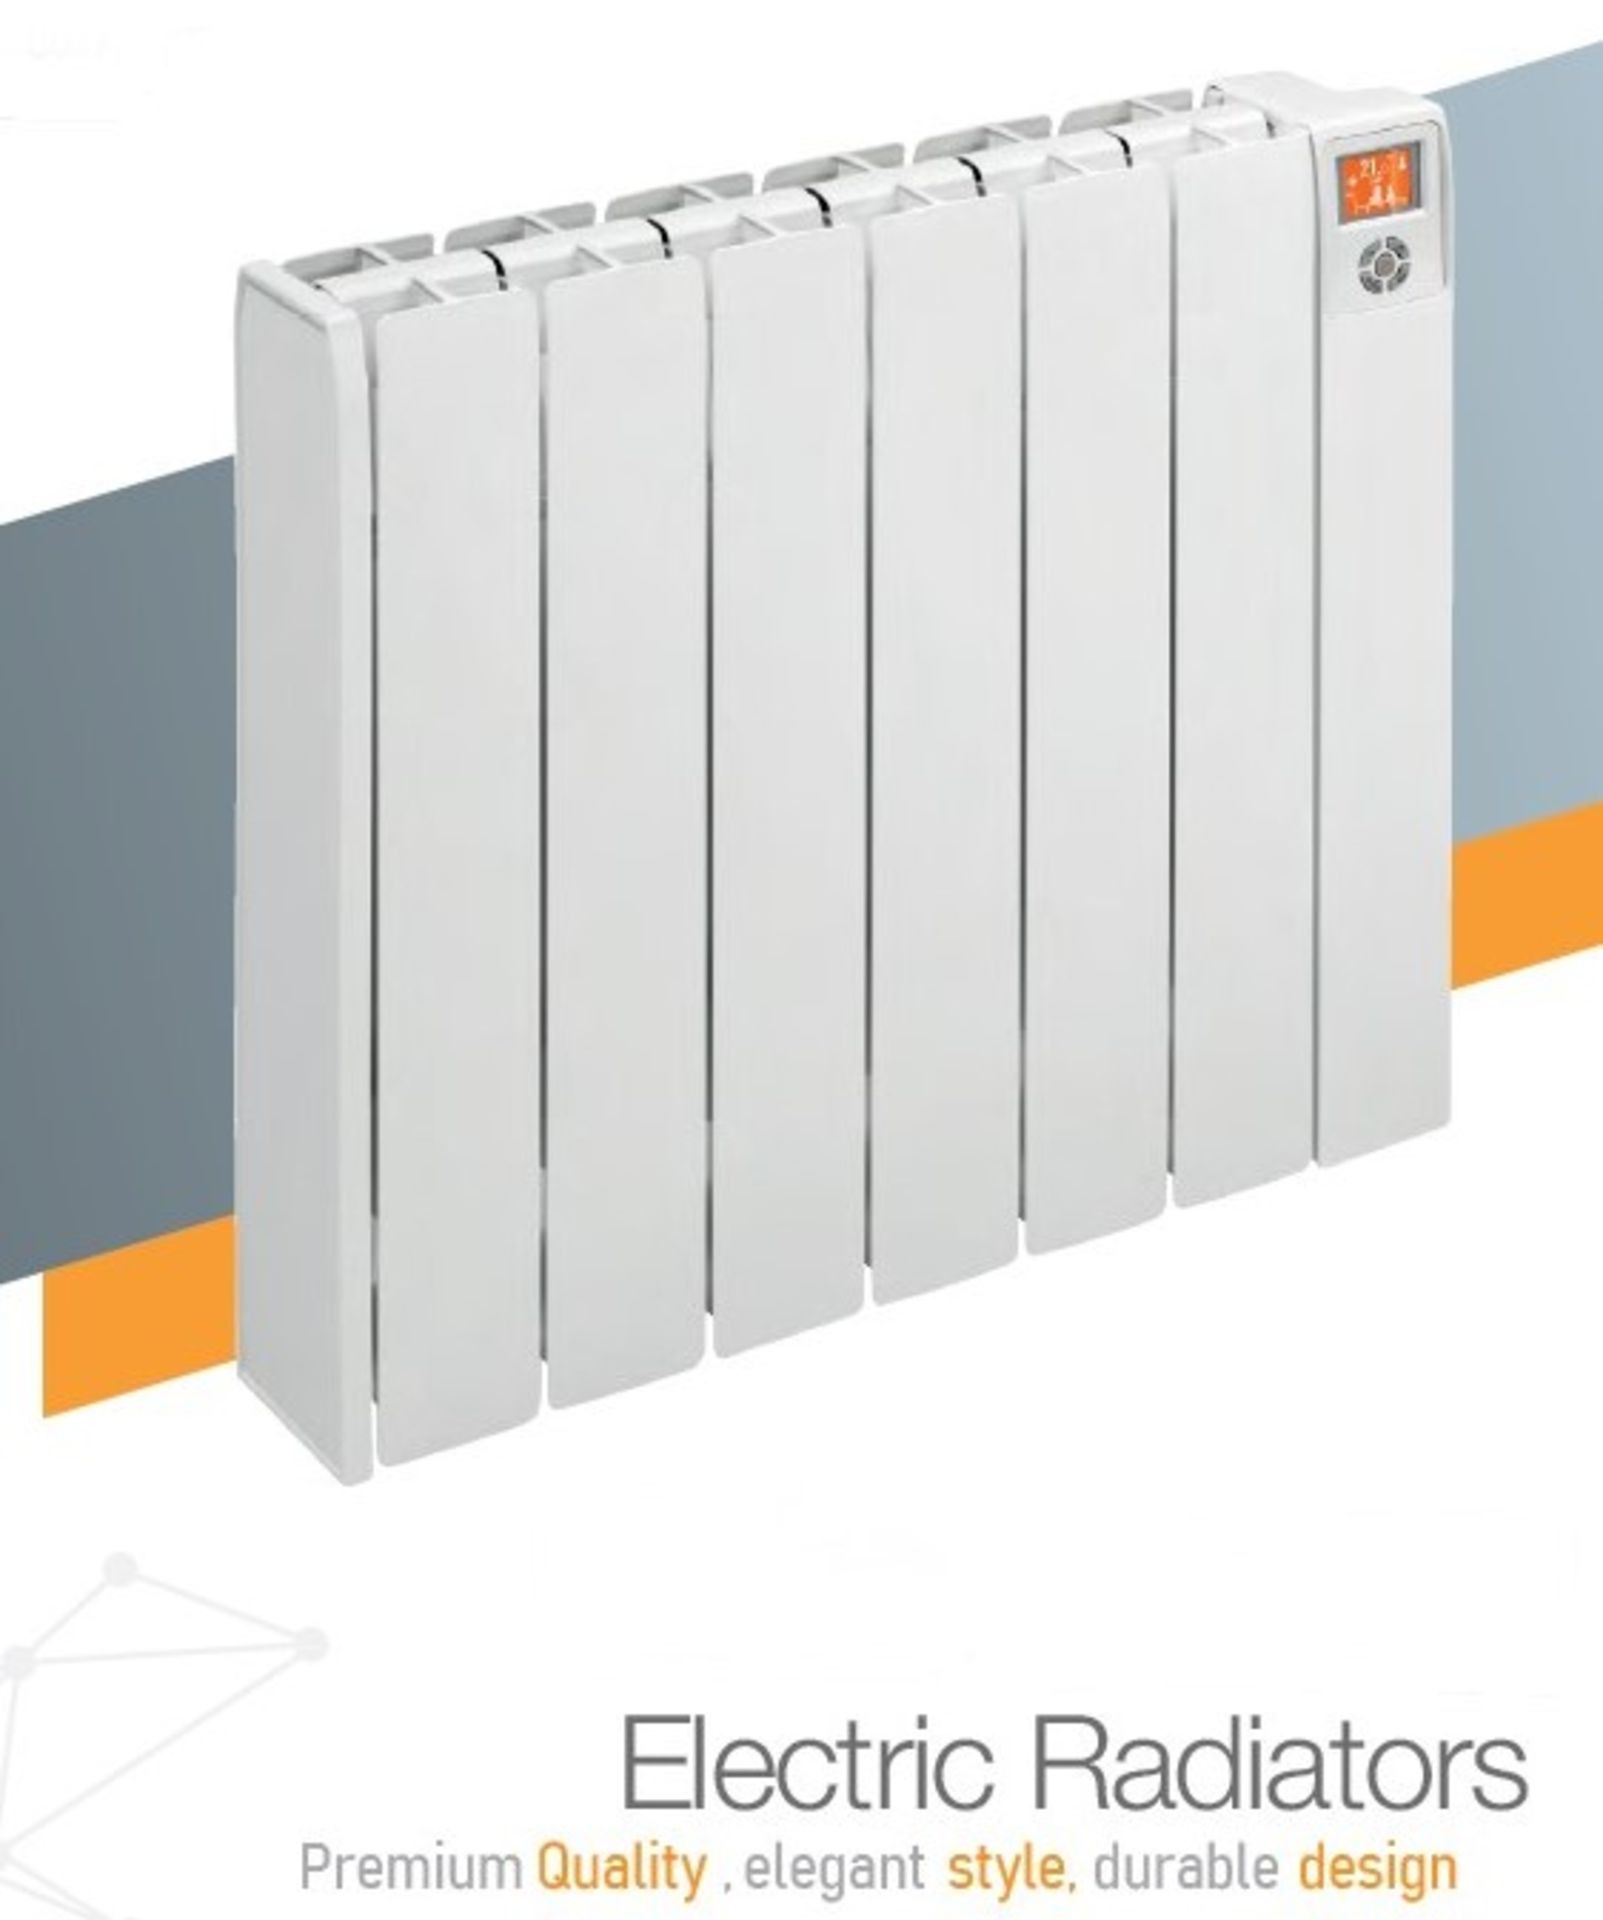 A 1800 Watt Electric Radiator - Fluid Filled with Aluminium Elements, - Image 6 of 6